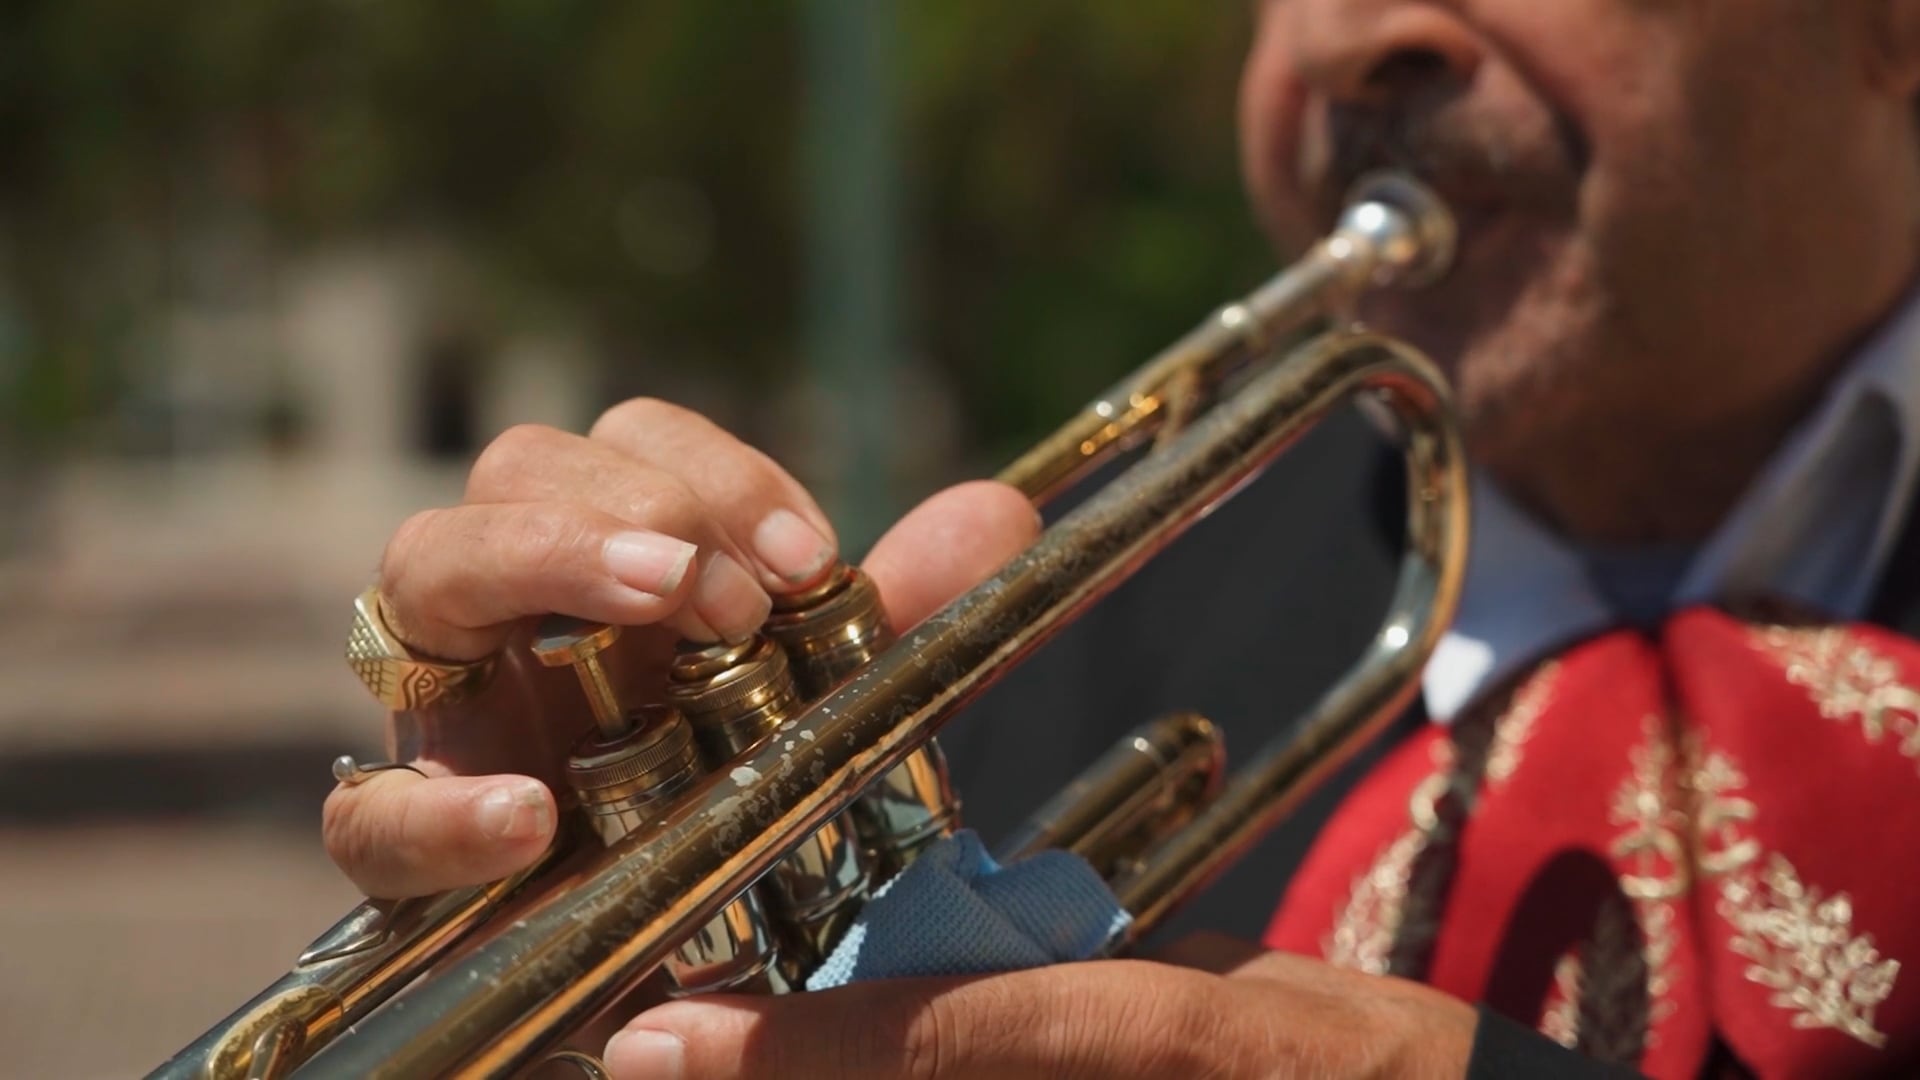 Man playing the trumpet, Free stock video, Musical performance, Live concert, 1920x1080 Full HD Desktop